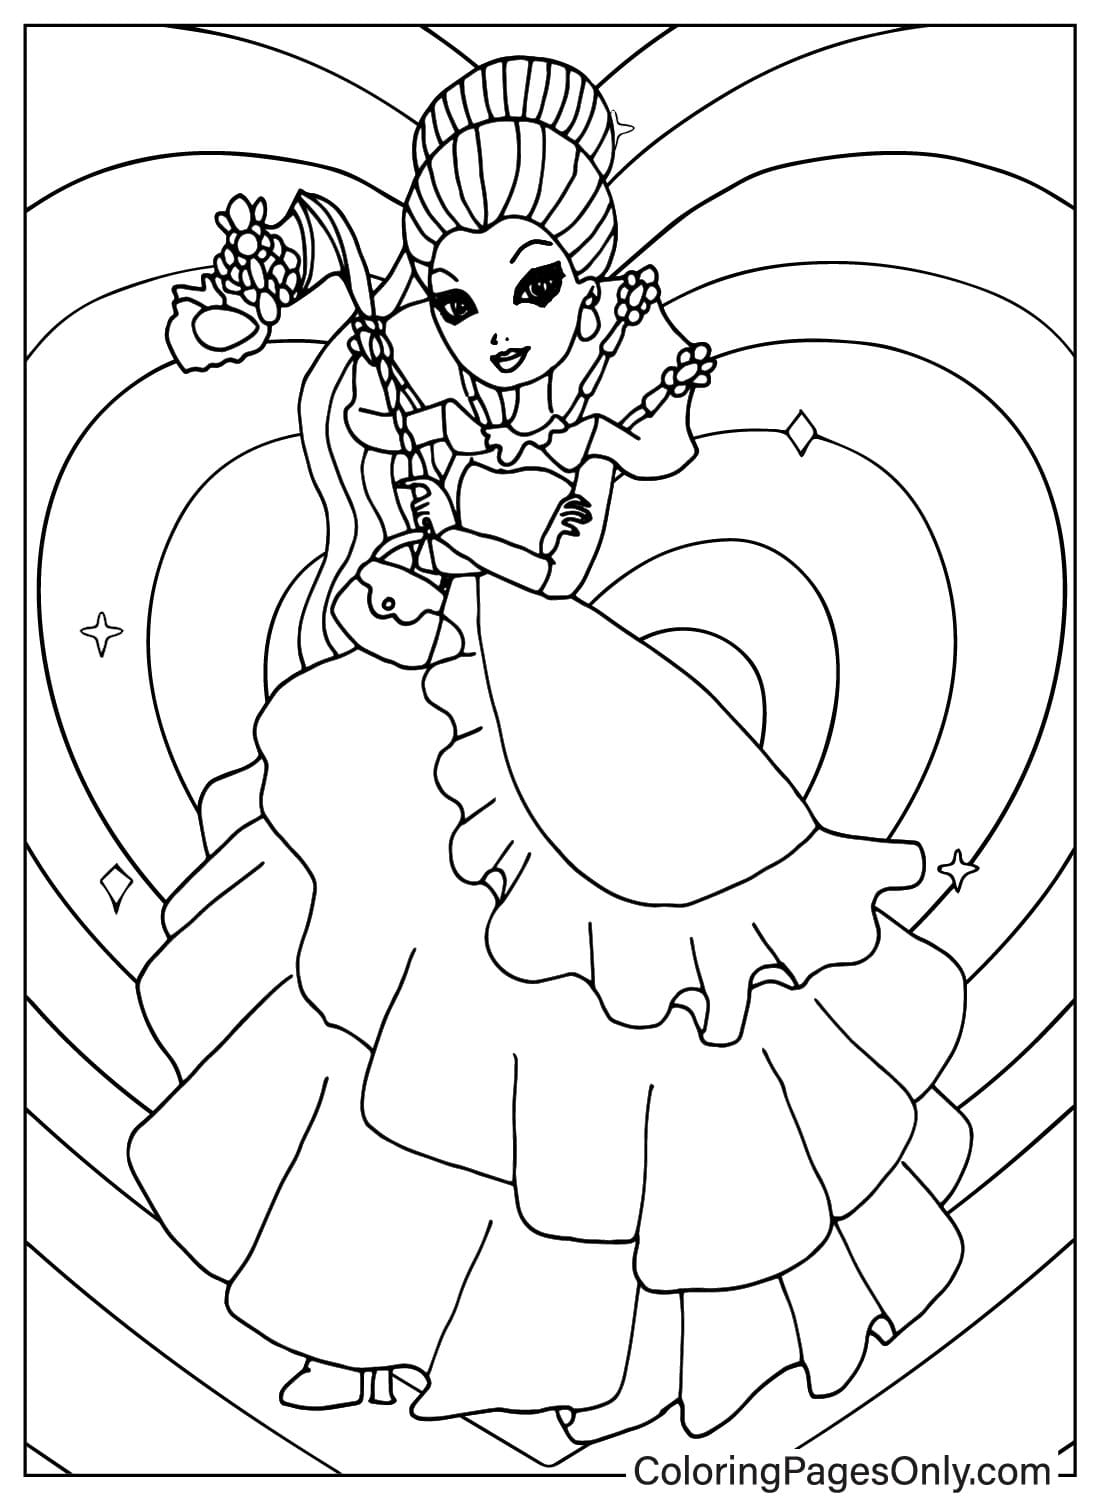 Coloriage Monster High imprimable de Monster High